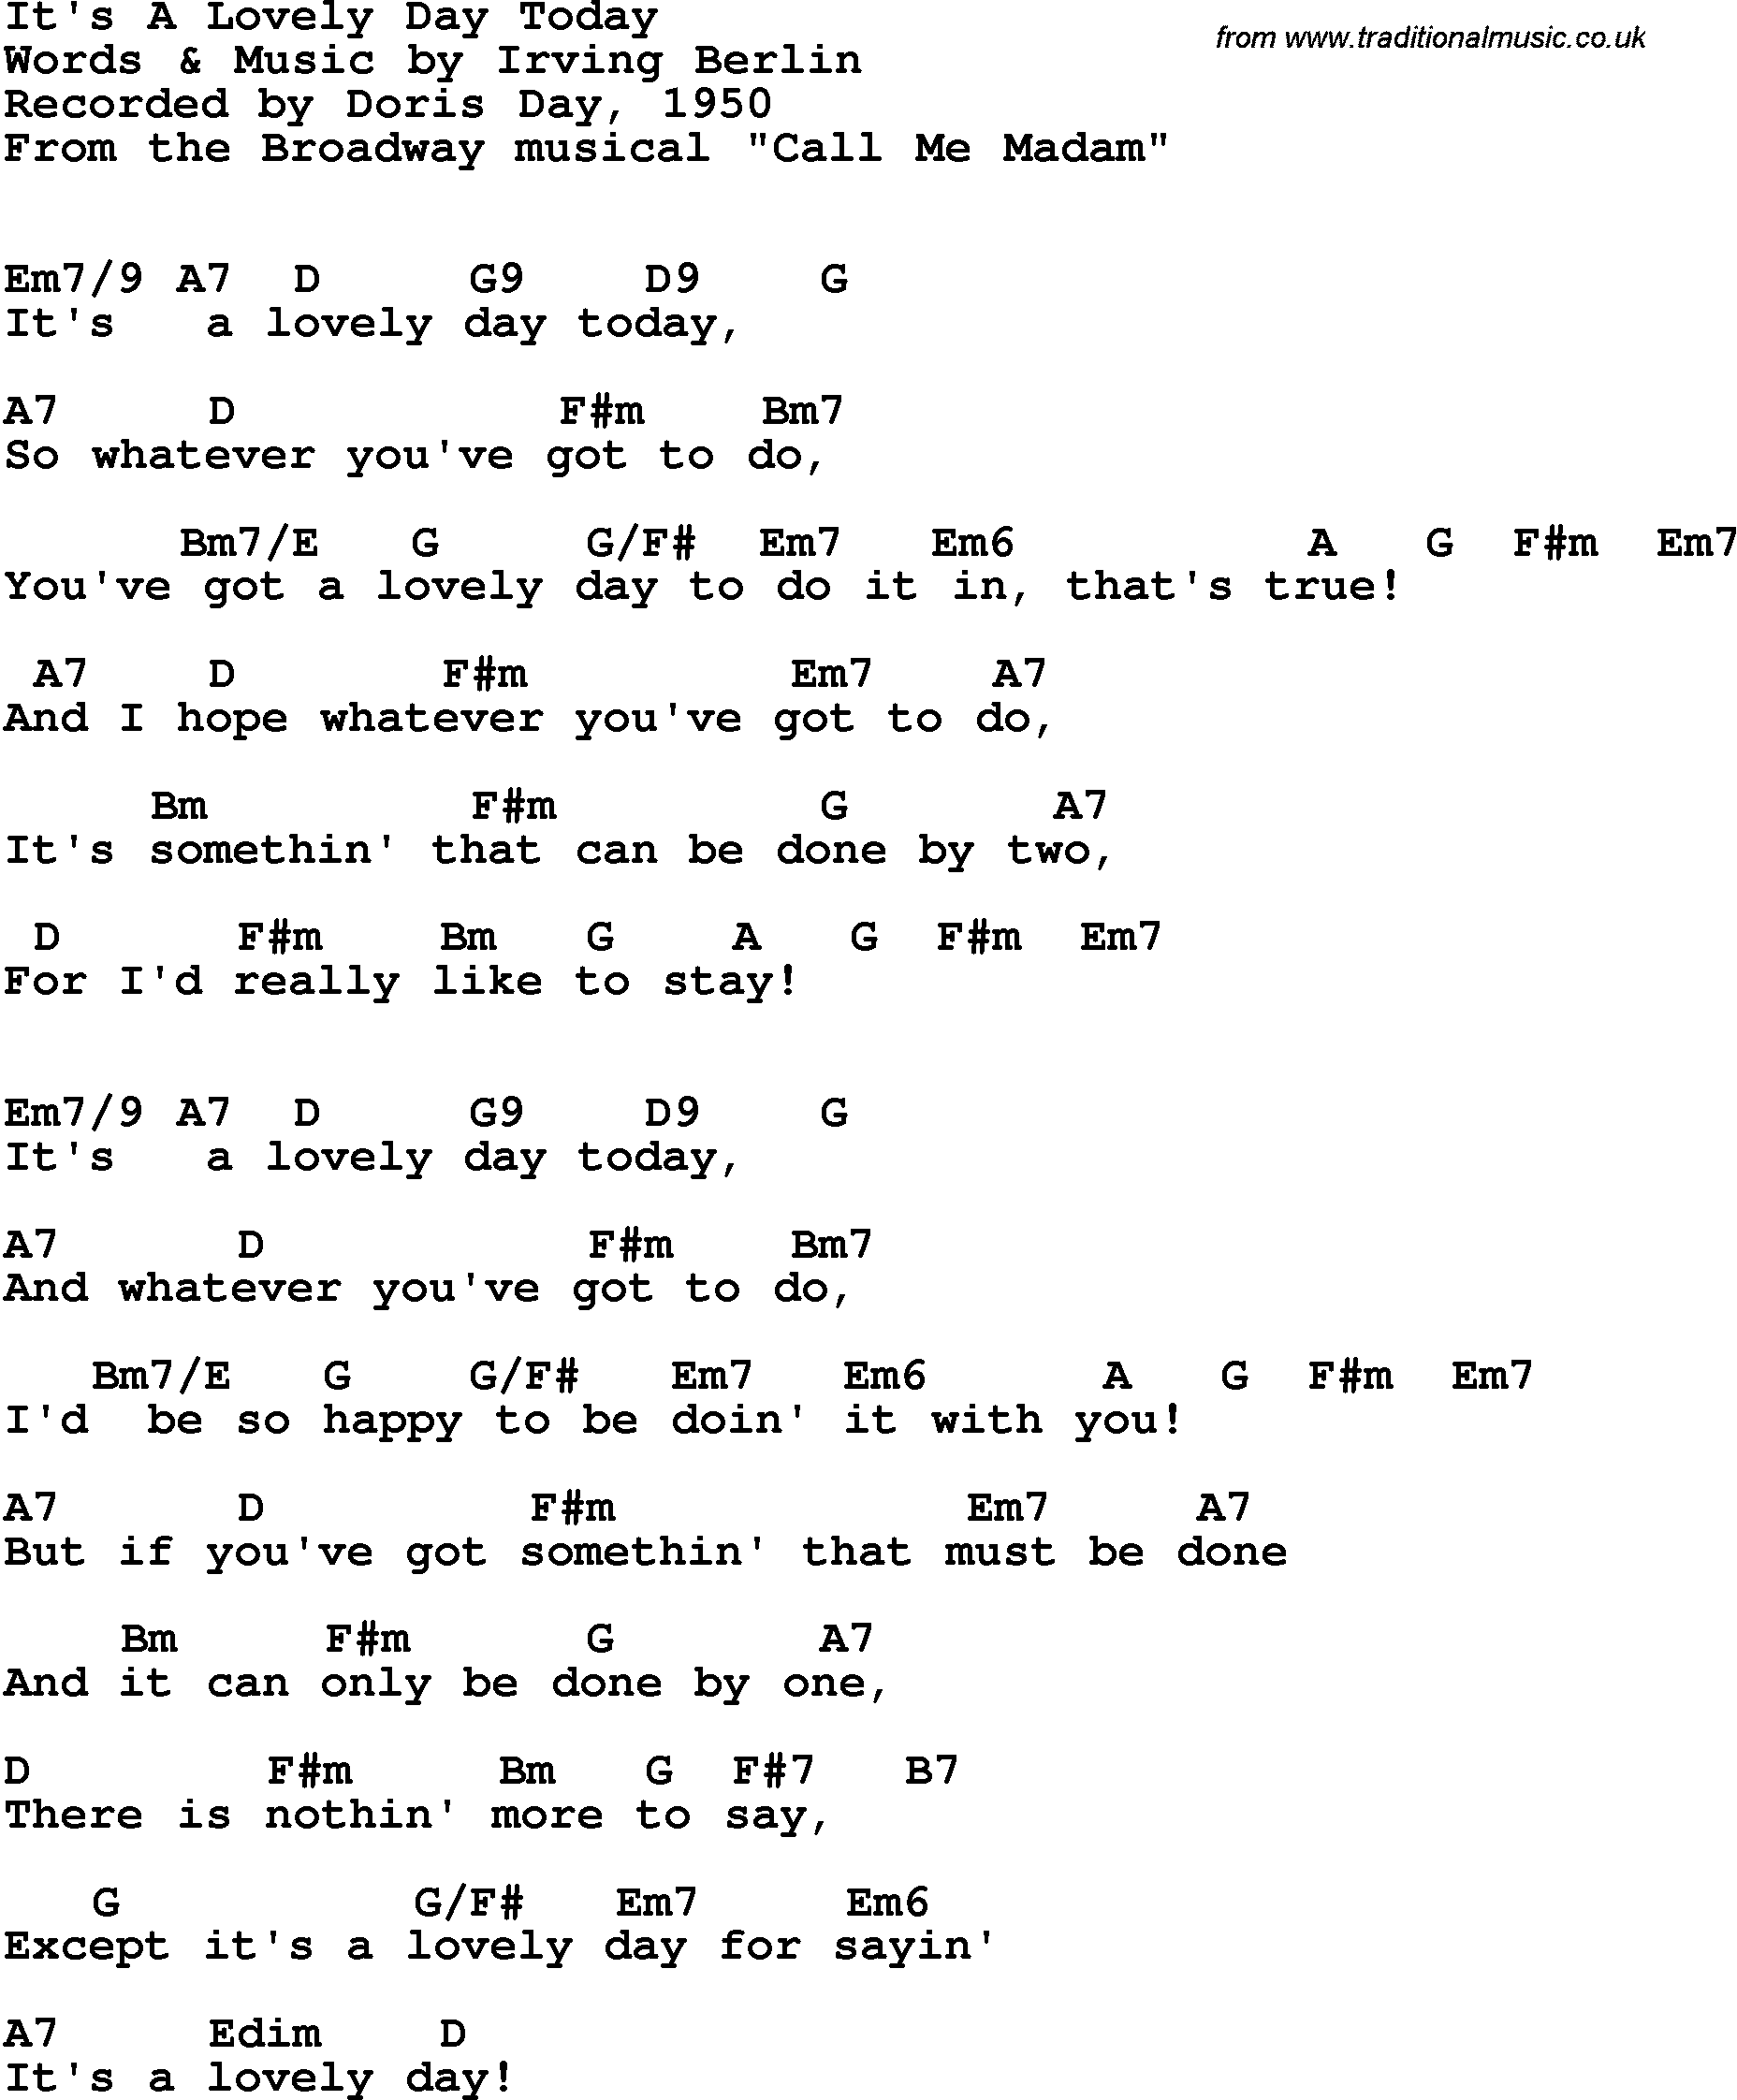 Song Lyrics with guitar chords for It's A Lovely Day Today - Doris Day, 1950